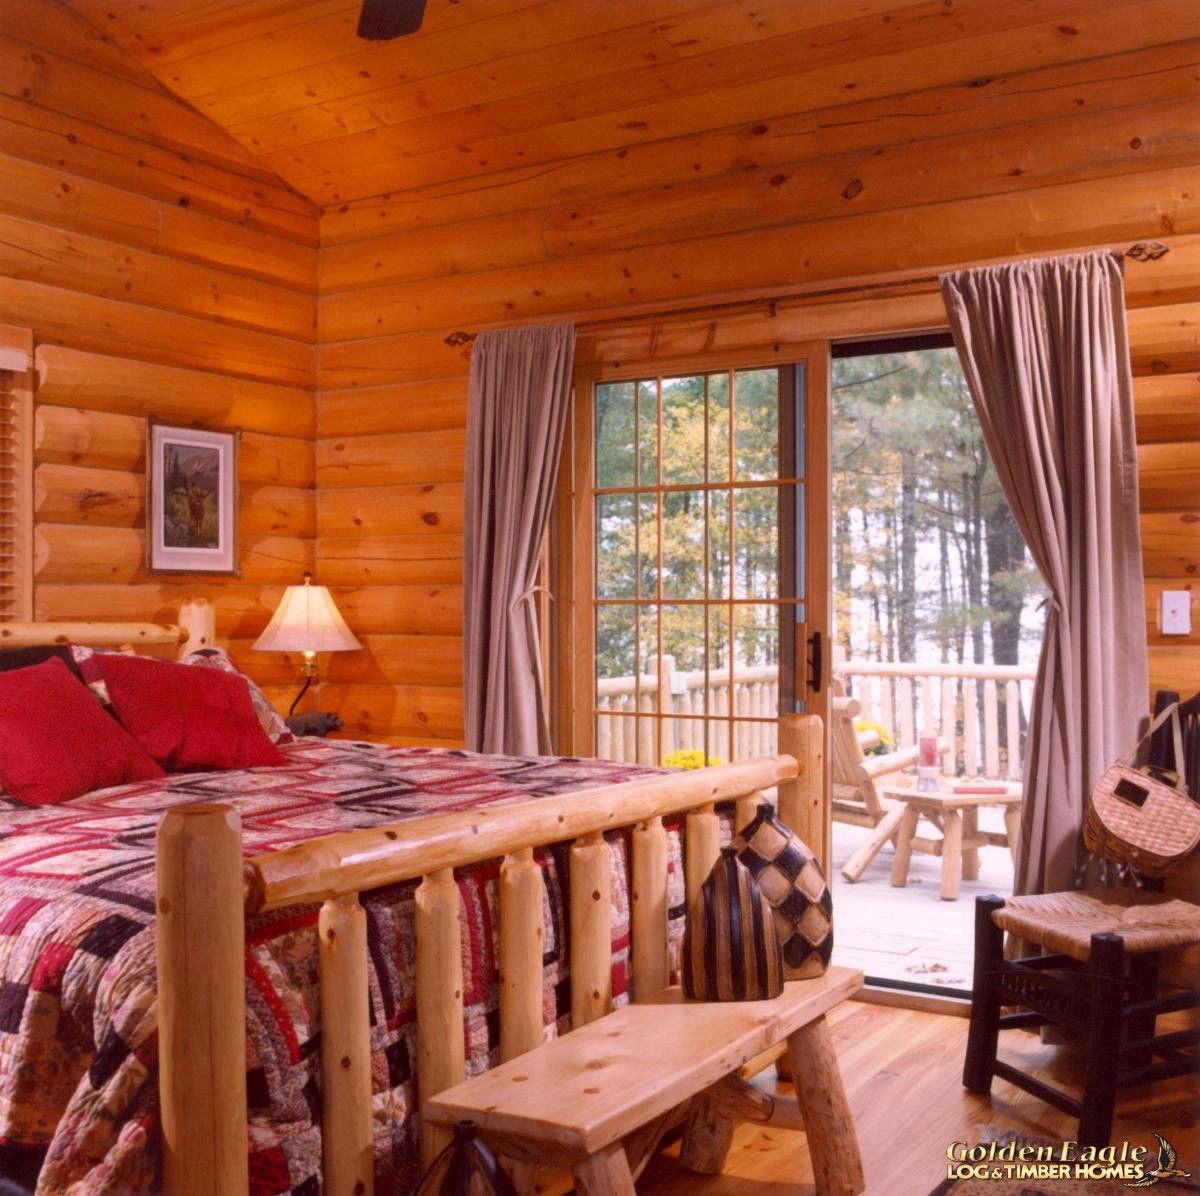 log four post bed in cabin bedroom with glass door to patio in background